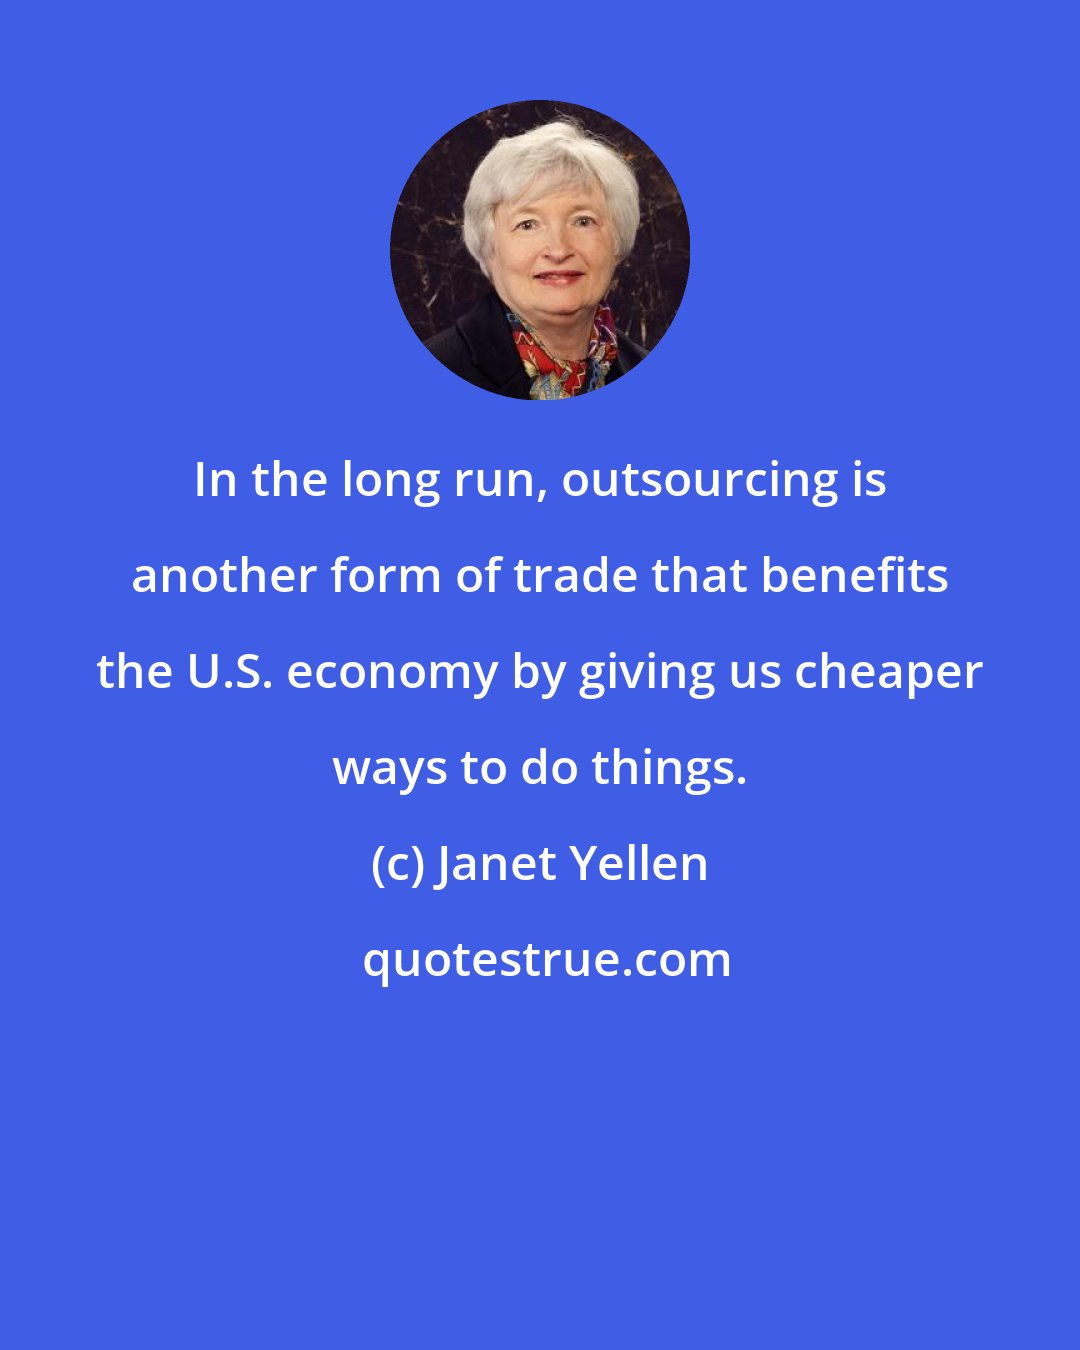 Janet Yellen: In the long run, outsourcing is another form of trade that benefits the U.S. economy by giving us cheaper ways to do things.